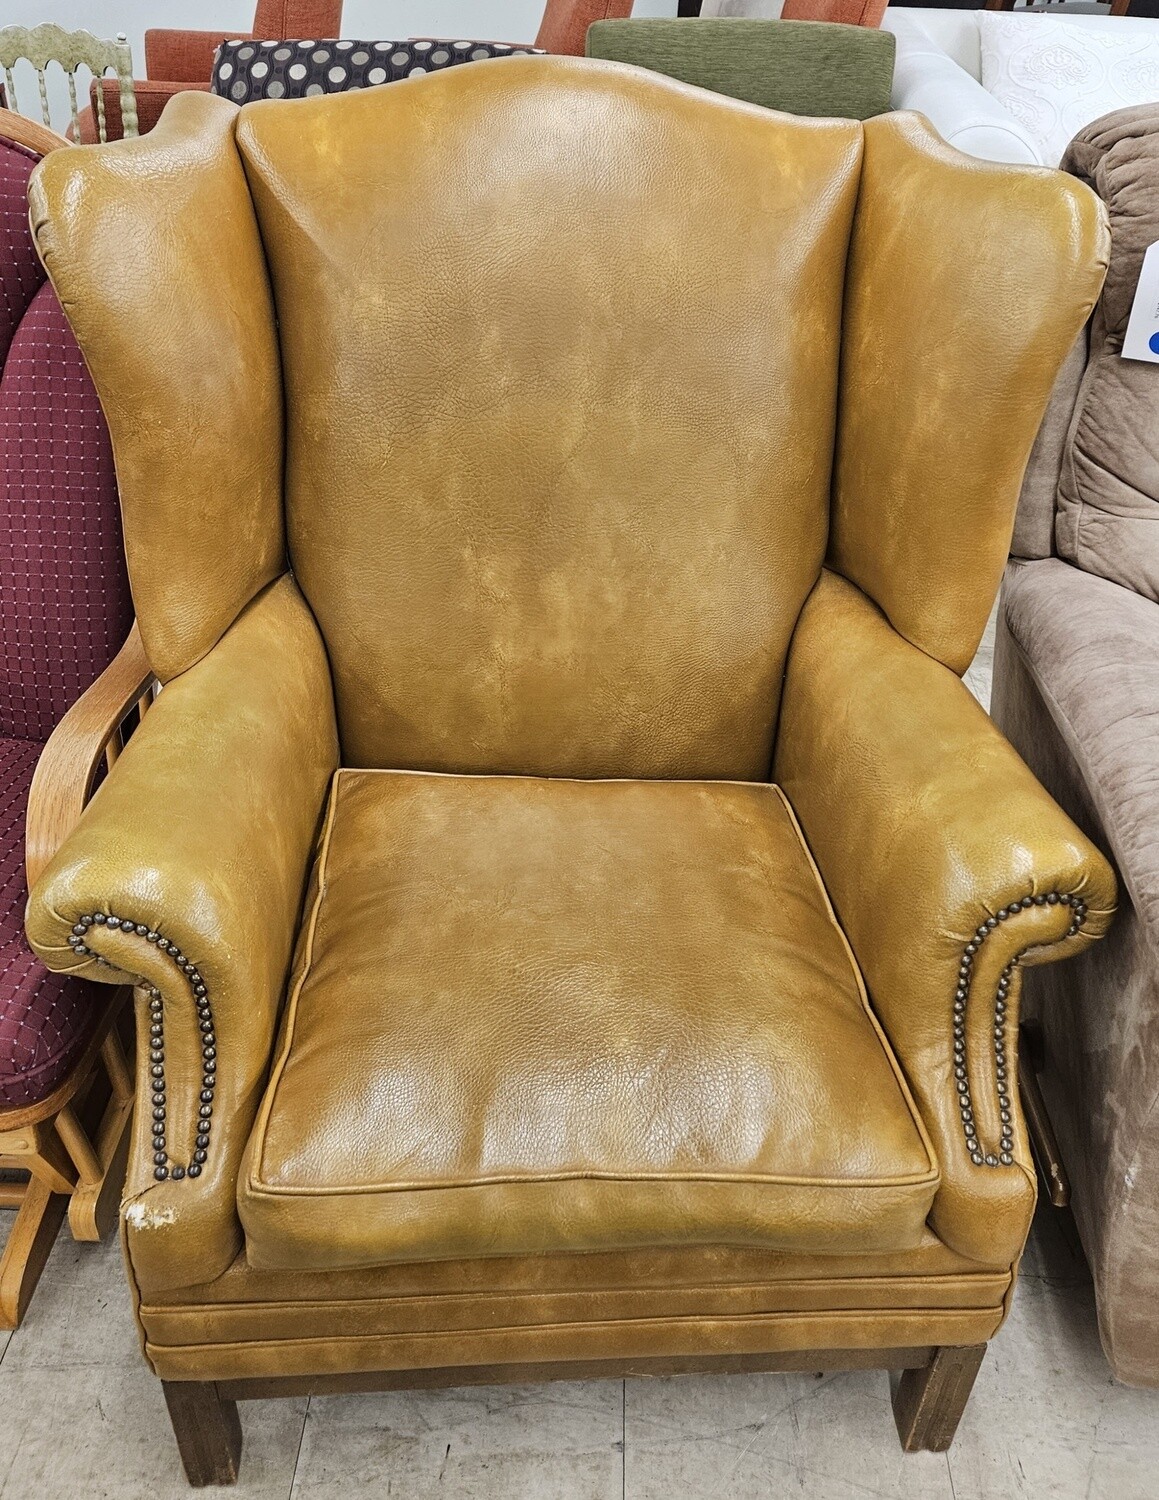 The Colonel Mustard Chair